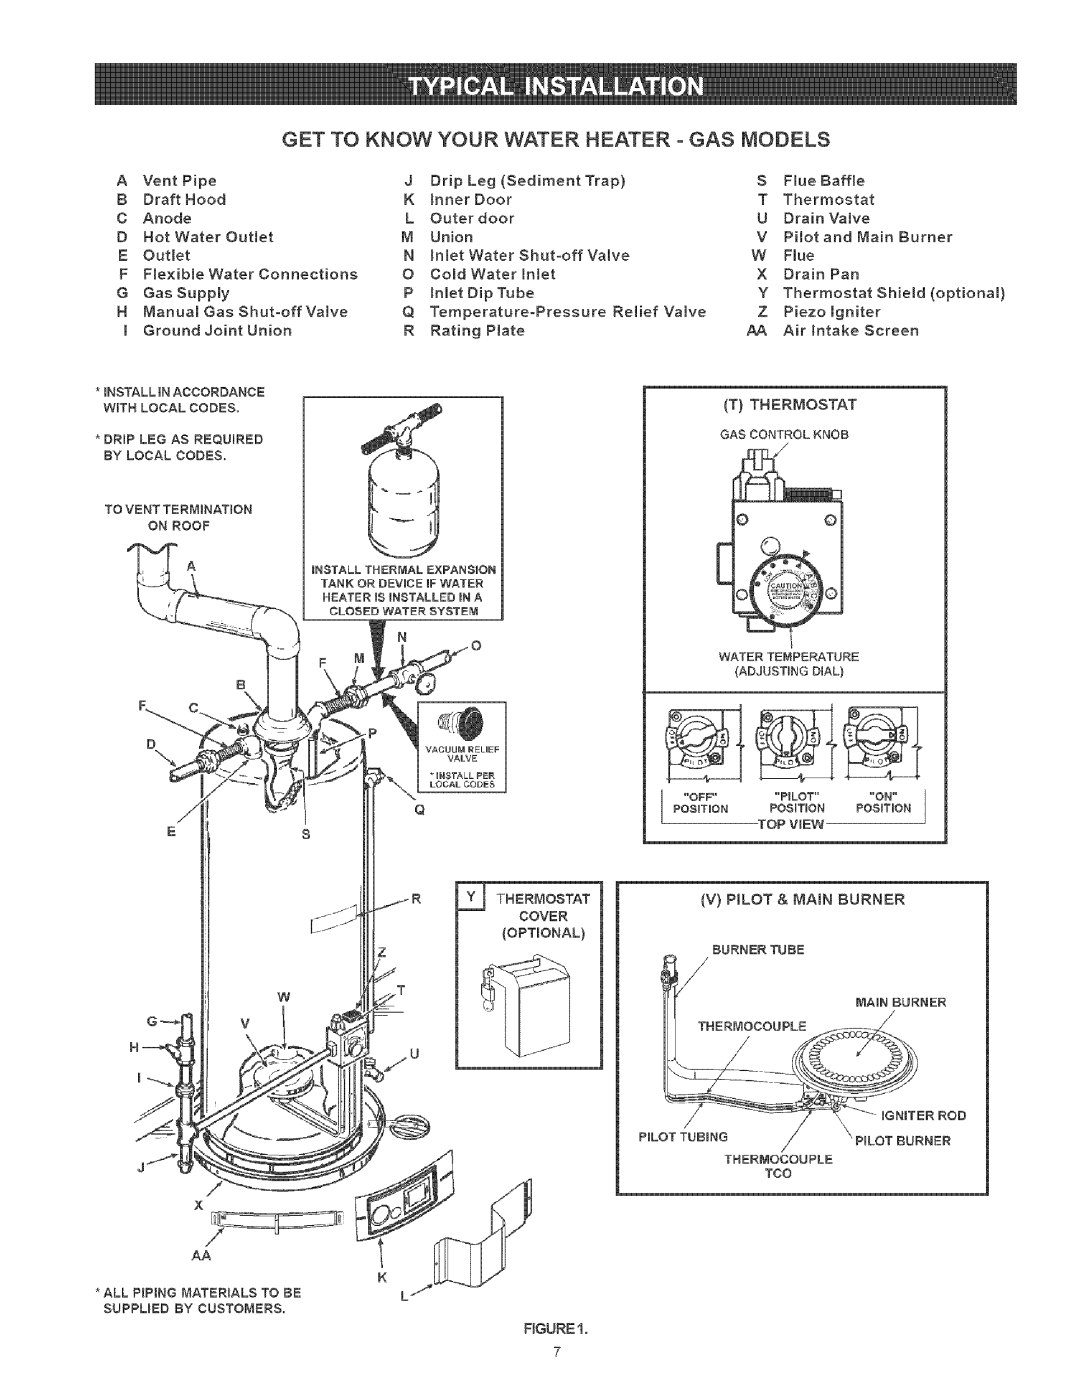 Kenmore 153336162, 153.336262, 153336762, 153336566 GET TO KNOW YOUR WATER HEATER o GAS MODELS, V Pilot & Main Burner 